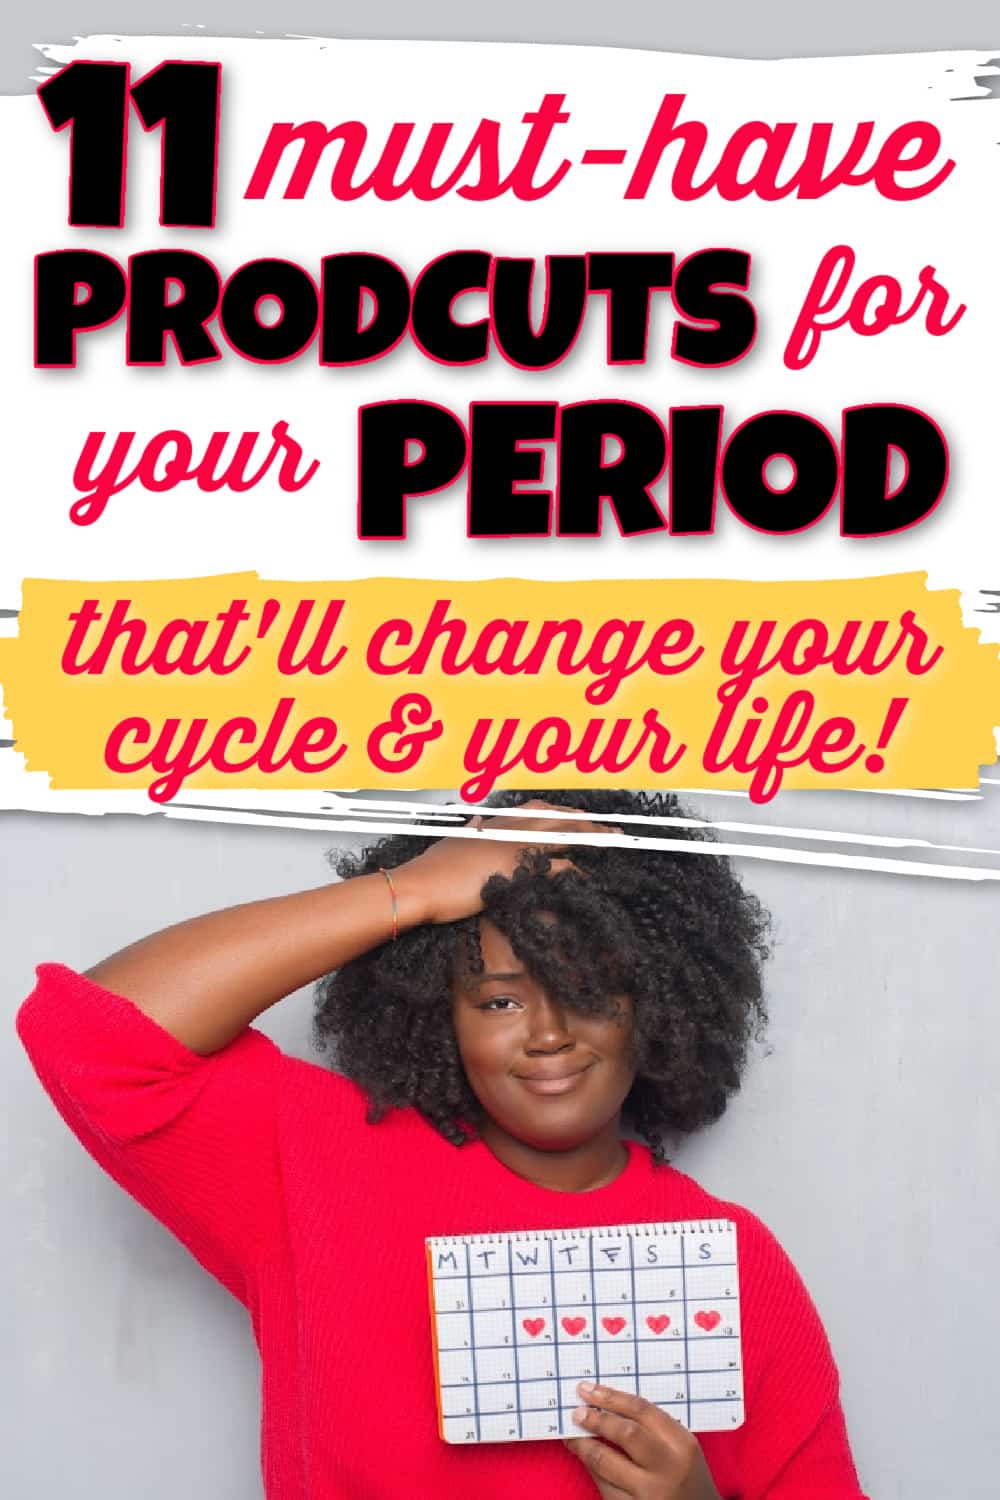 Black female with hand on head smiling. Other hand is holding a calendar with red hearts indicating her period. Title text says 11 must-have products for your period that'll change your cycle & your life! Best period products!